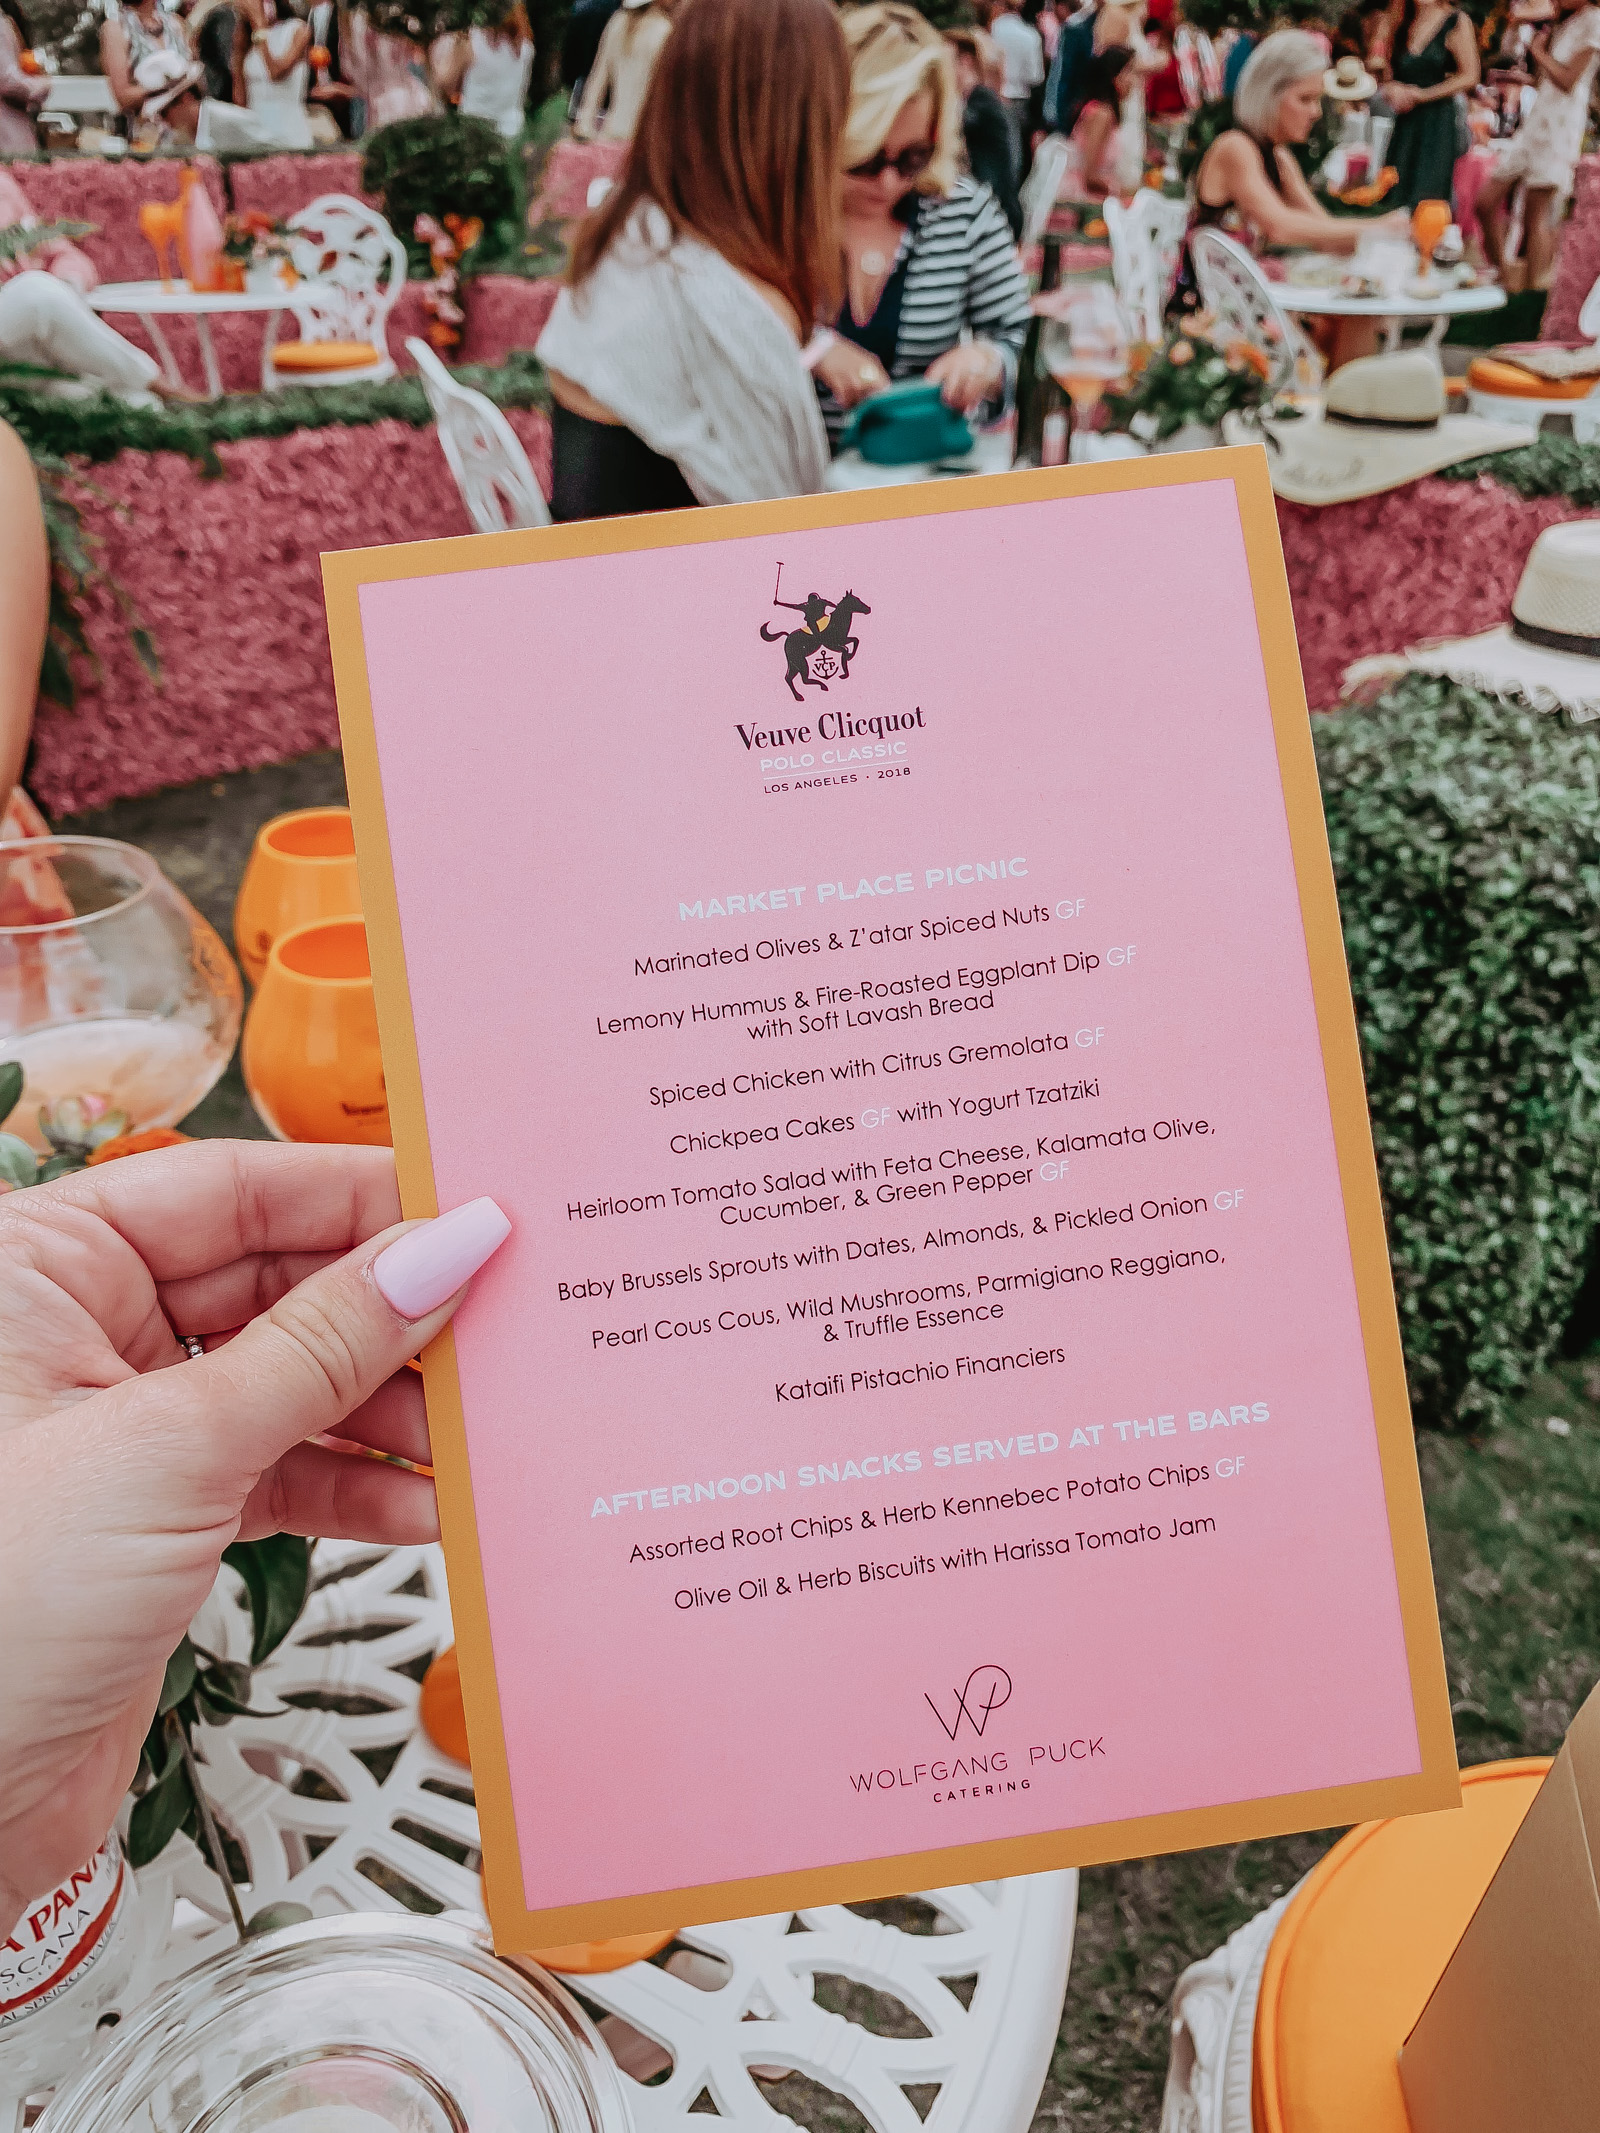 Veuve Clicquot Polo Classic | Rosé Garden | Polo Match | Revolve Dress | Veuve Polo Classic Worth it or Not | Blondie in the City by Hayley Larue